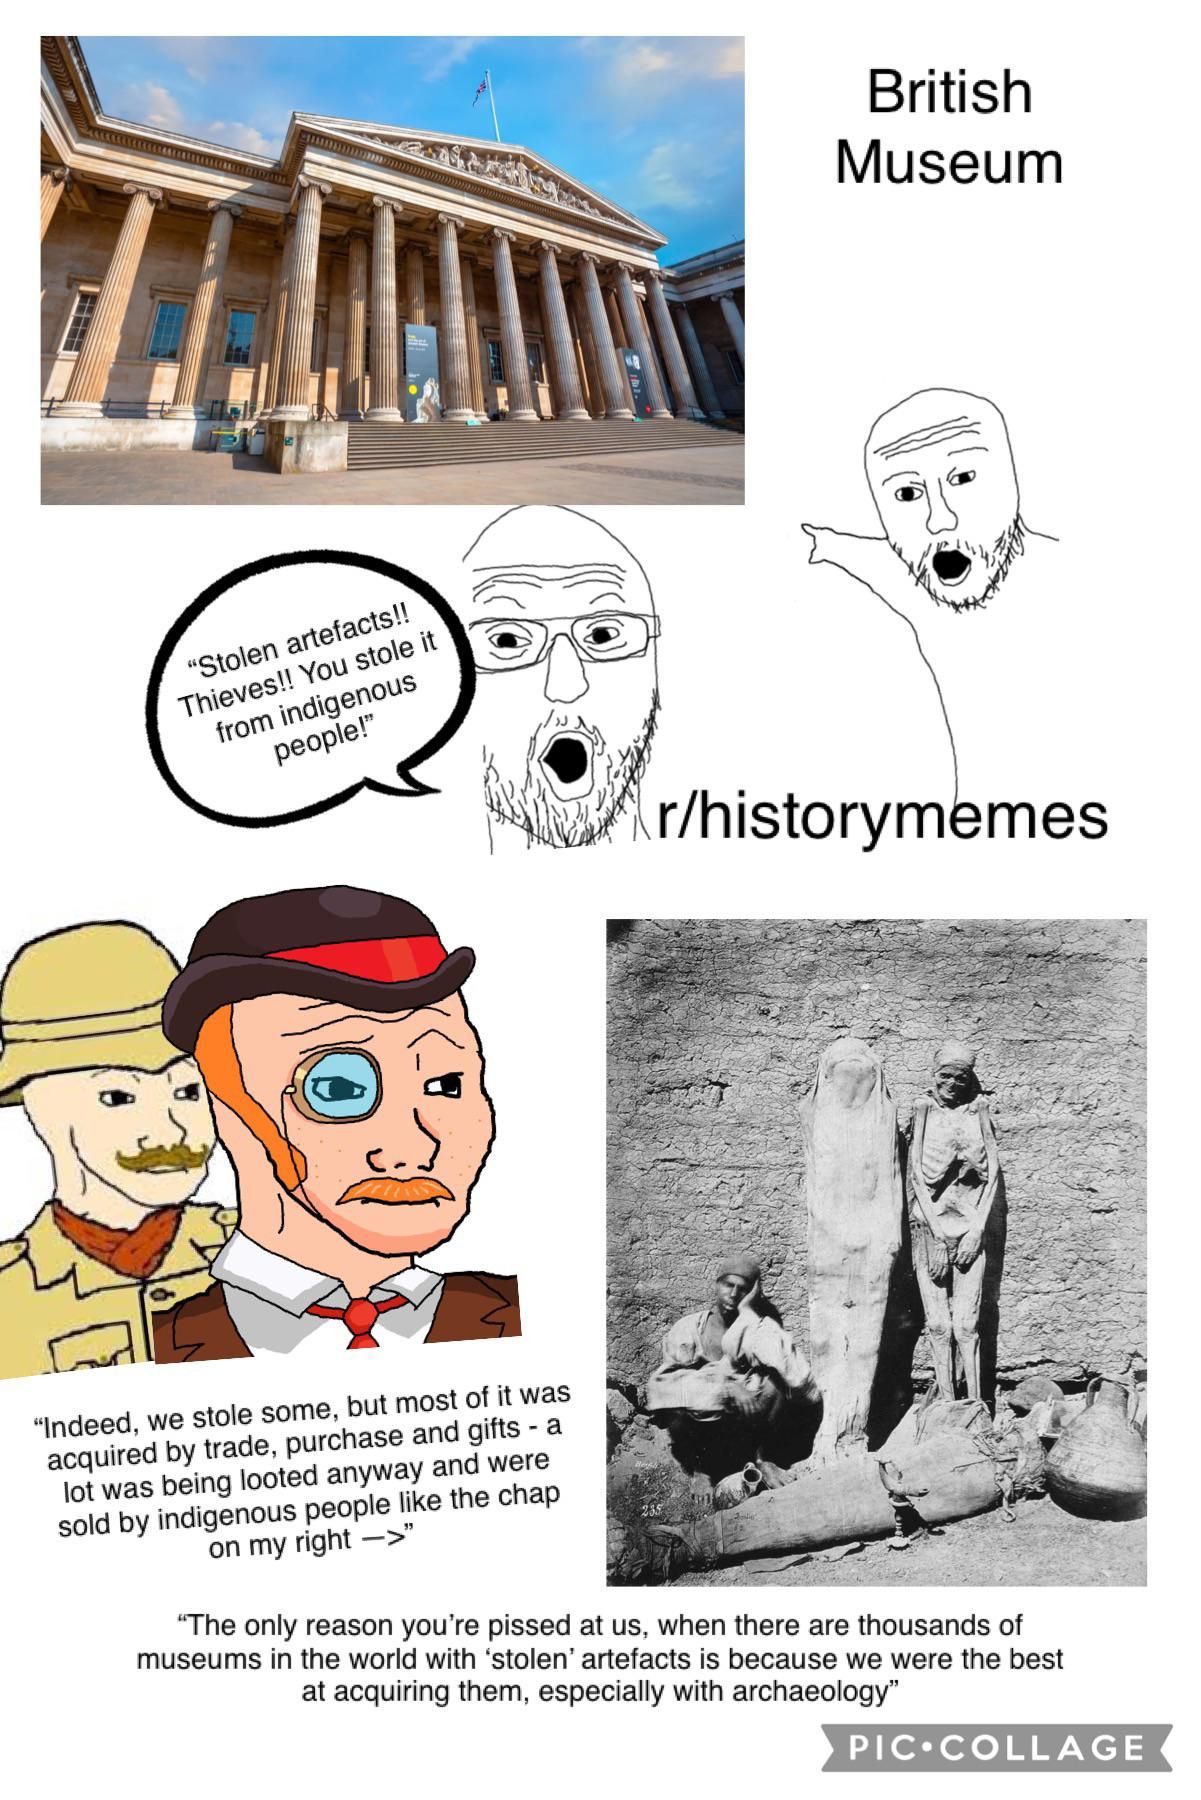 This sub every 5 minutes when it mentions the British Museum